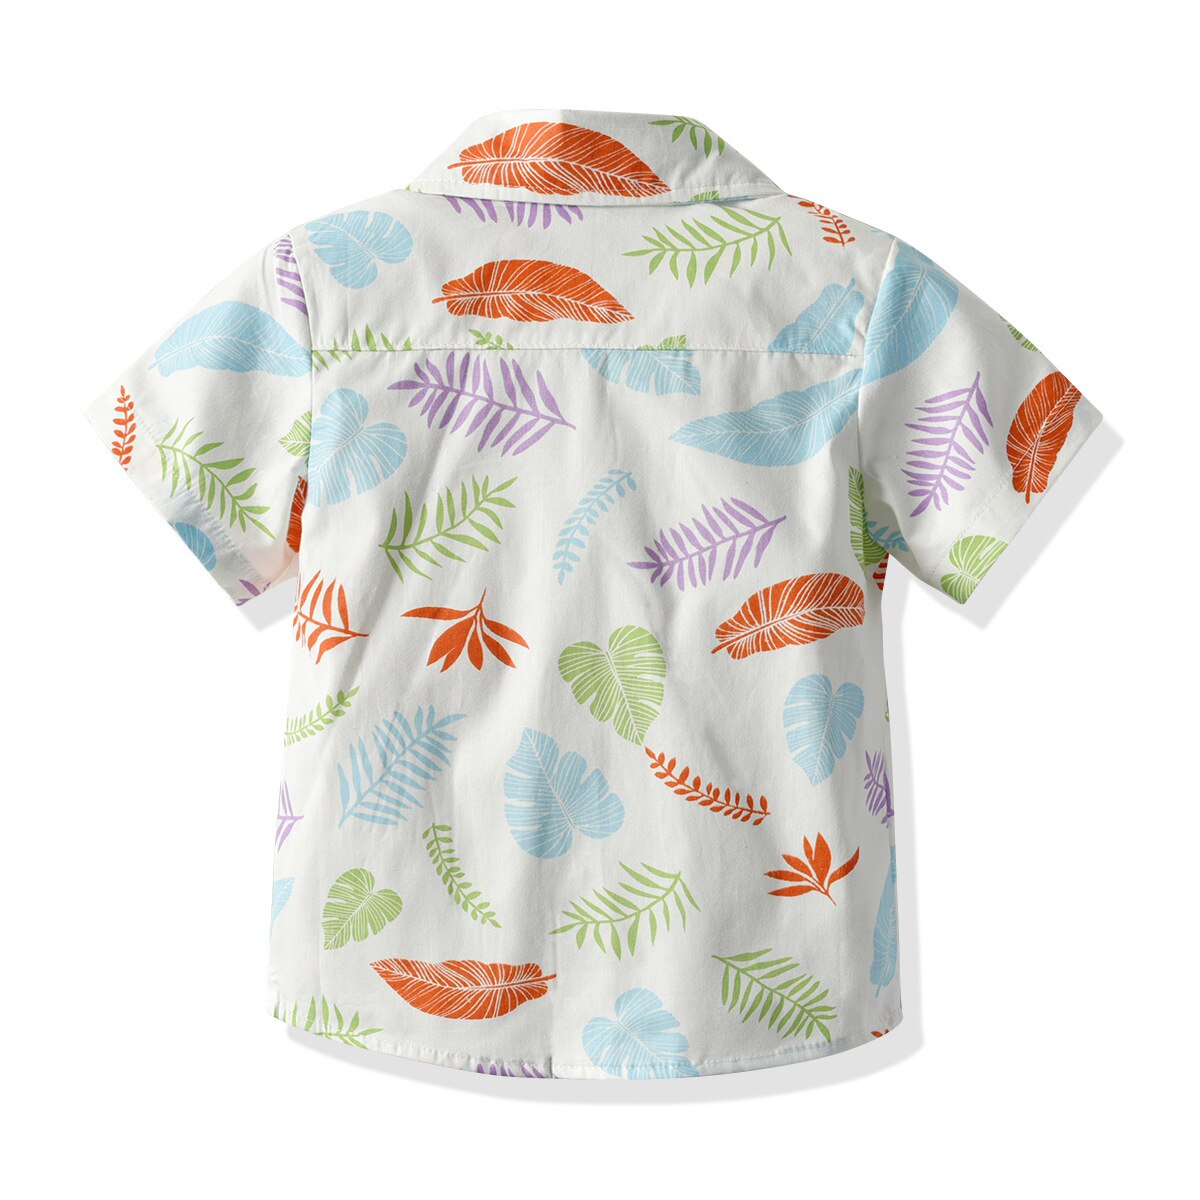 Summer Infant Boys Shirt Colorful Leaves Printing Short Sleeve Lapel Single-breasted Top Children Casual Clothes